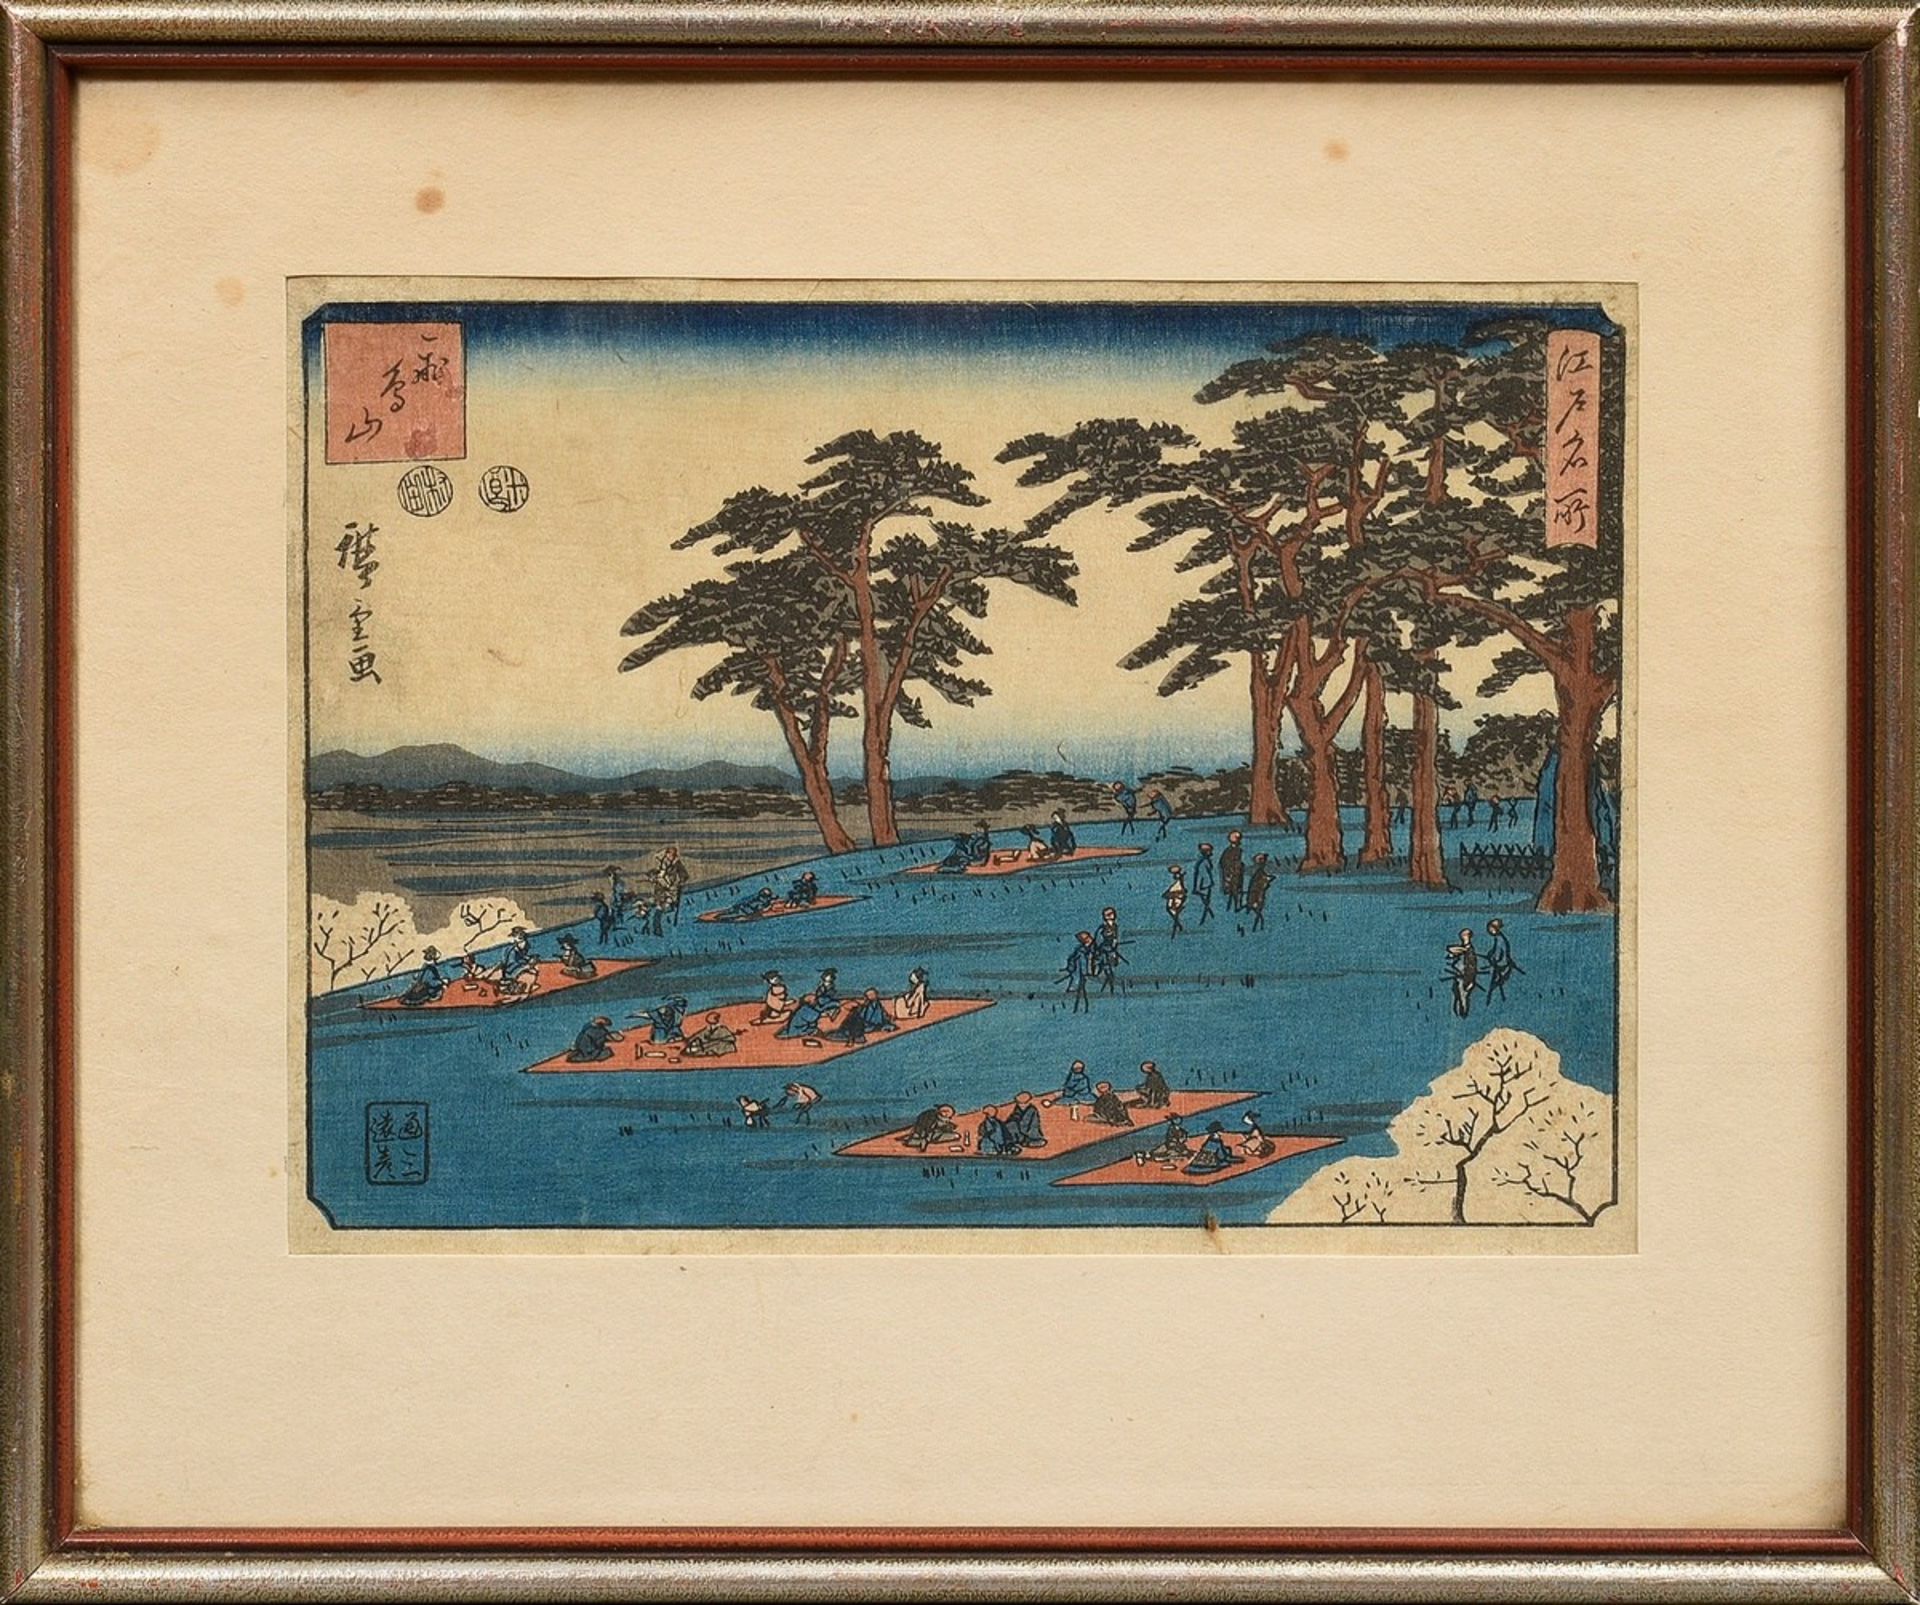 3 Andô Hiroshige (1797-1858) "Oiso" from the series Tôkaidô gojûsan tsugi (Of the 53 Stations of th - Image 10 of 11